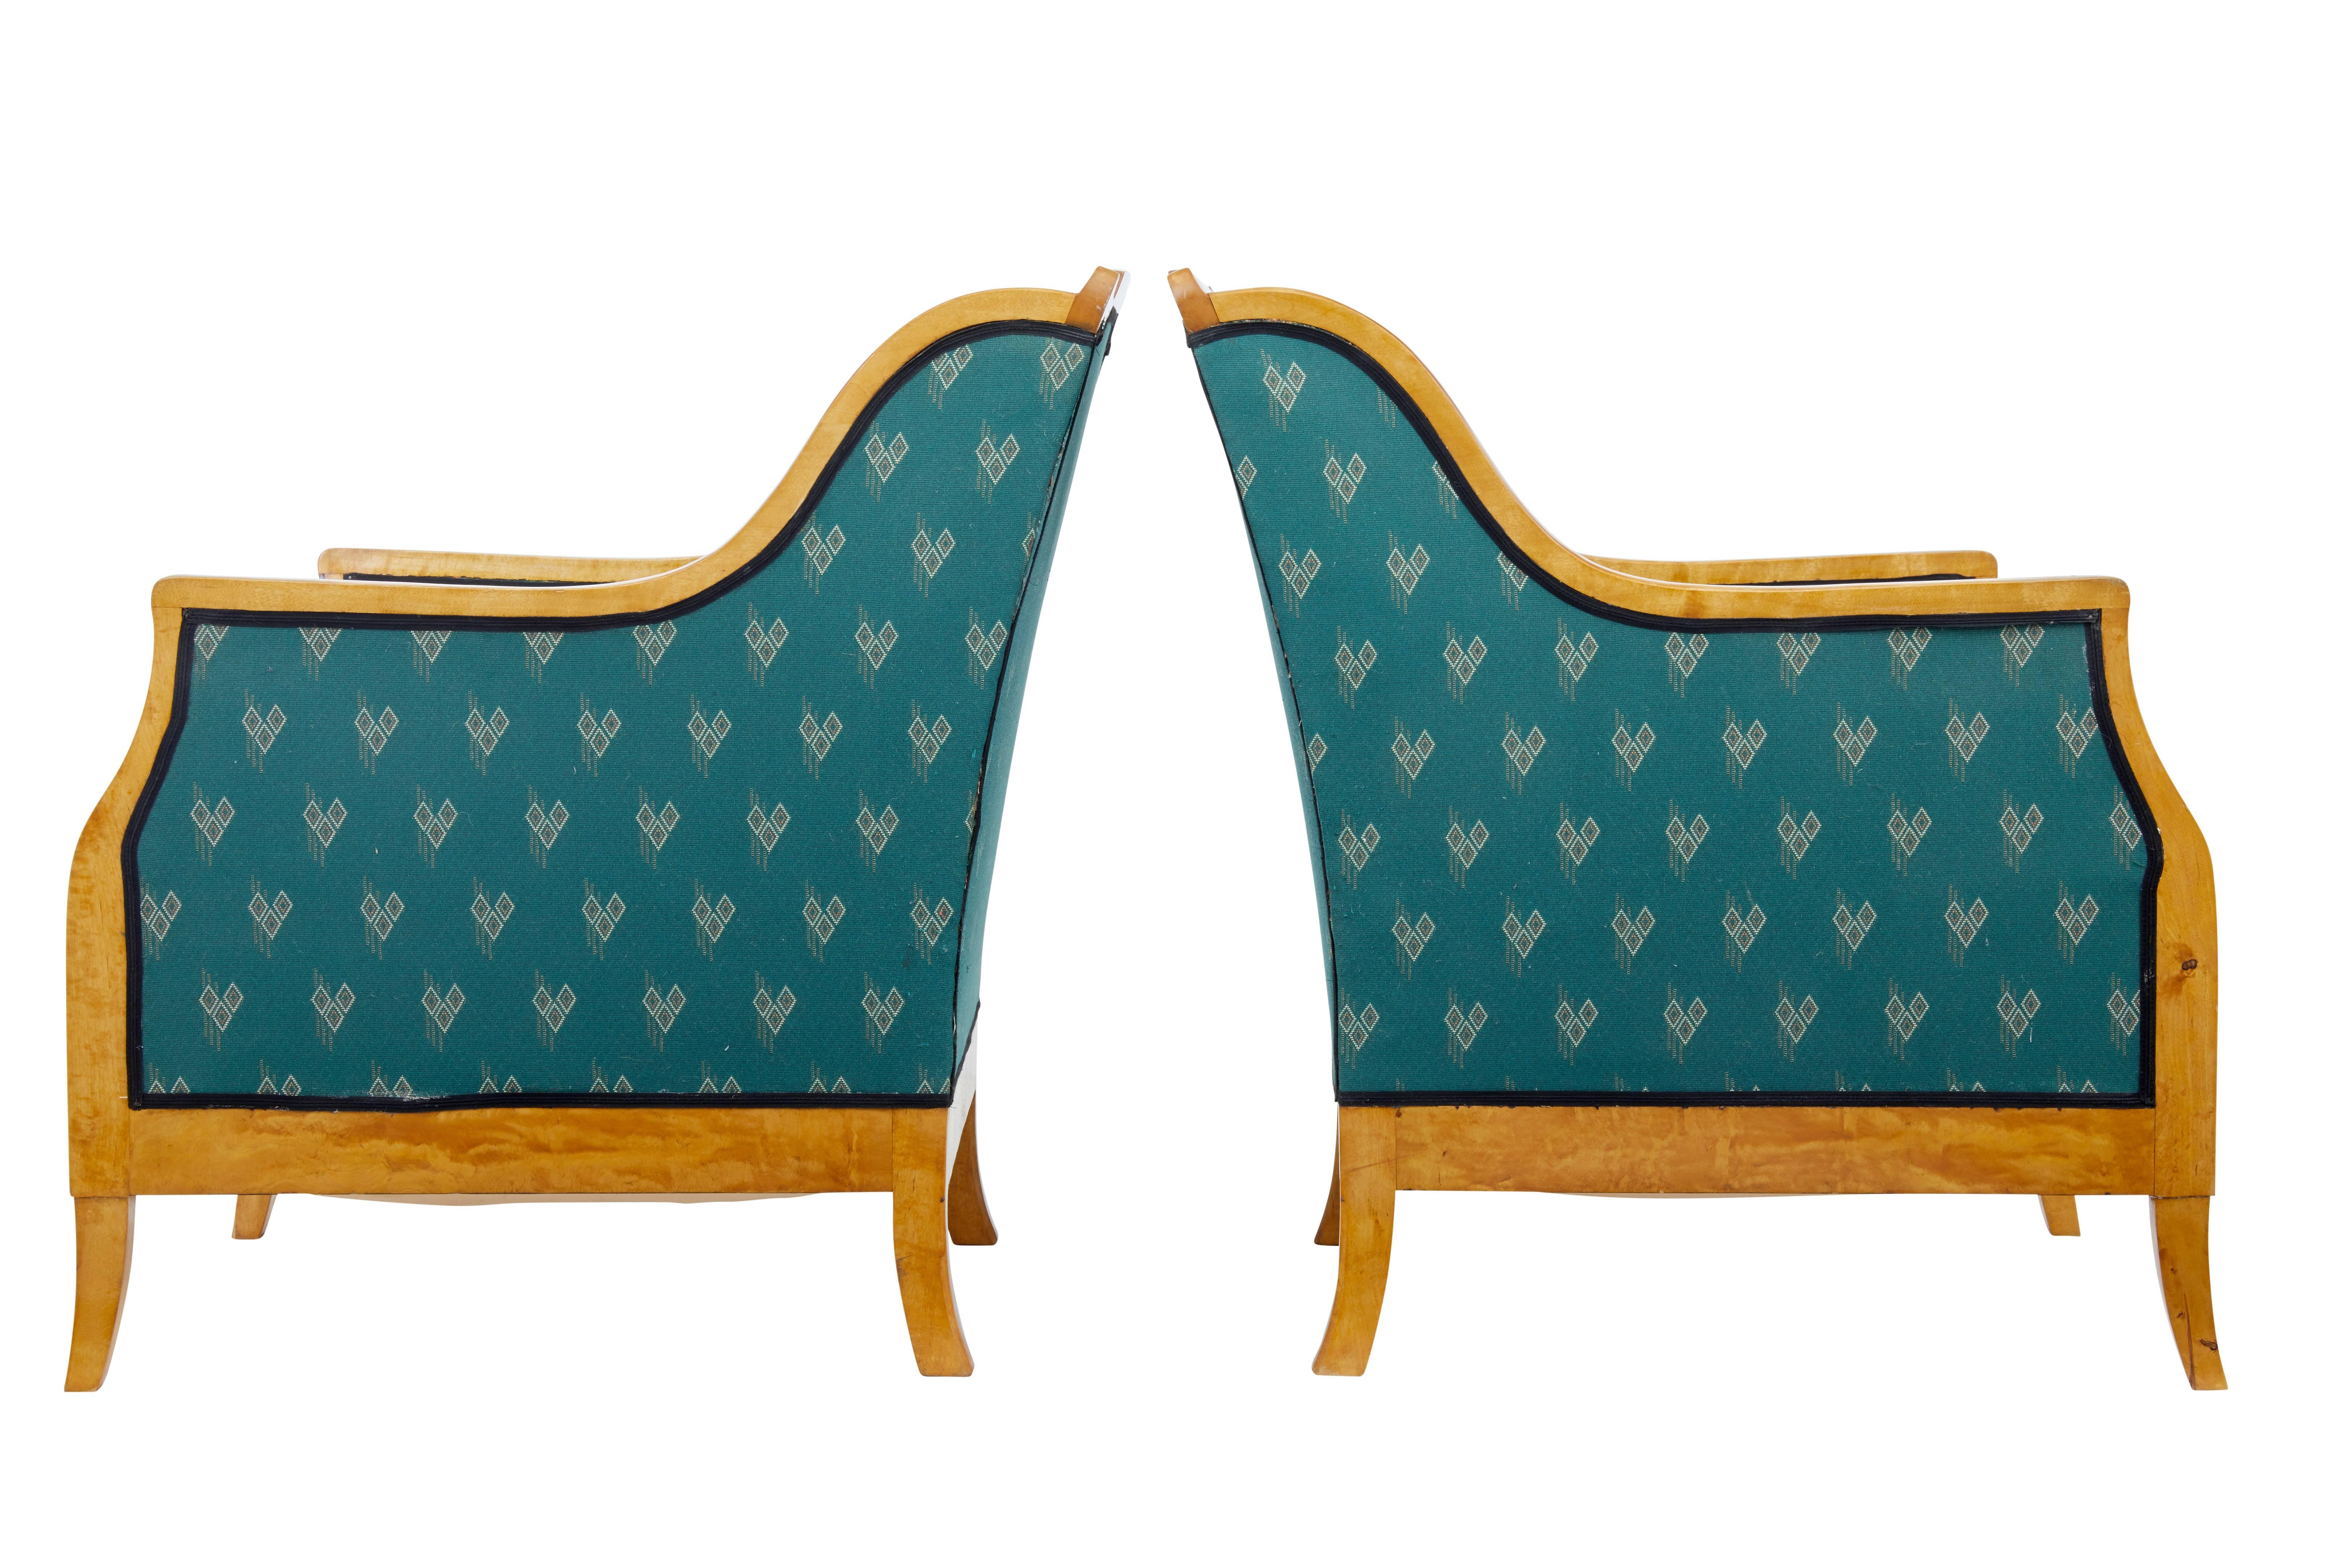 Elegant pair of Swedish birch, circa 1910.
Rich colored birch, shaped arm fronts and backs.
Well presented in contrasting green upholstery which is in good condition.
Minor loss to wood work on one back.

Measures: Height: 35 1/2